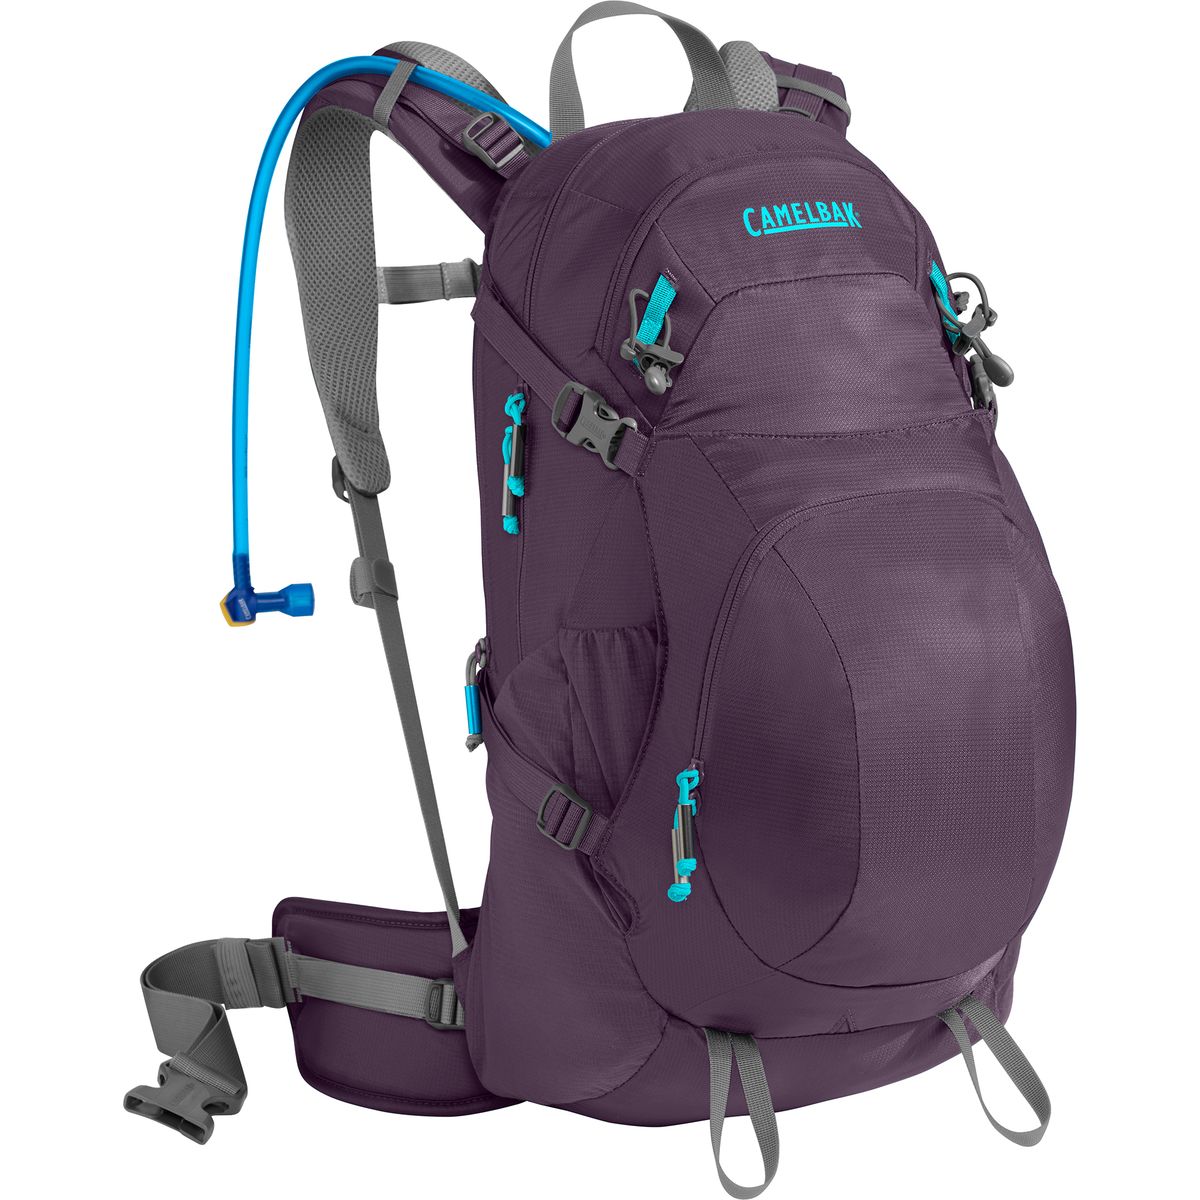 CamelBak Sequoia 22 Hydration Backpack 1343cu in